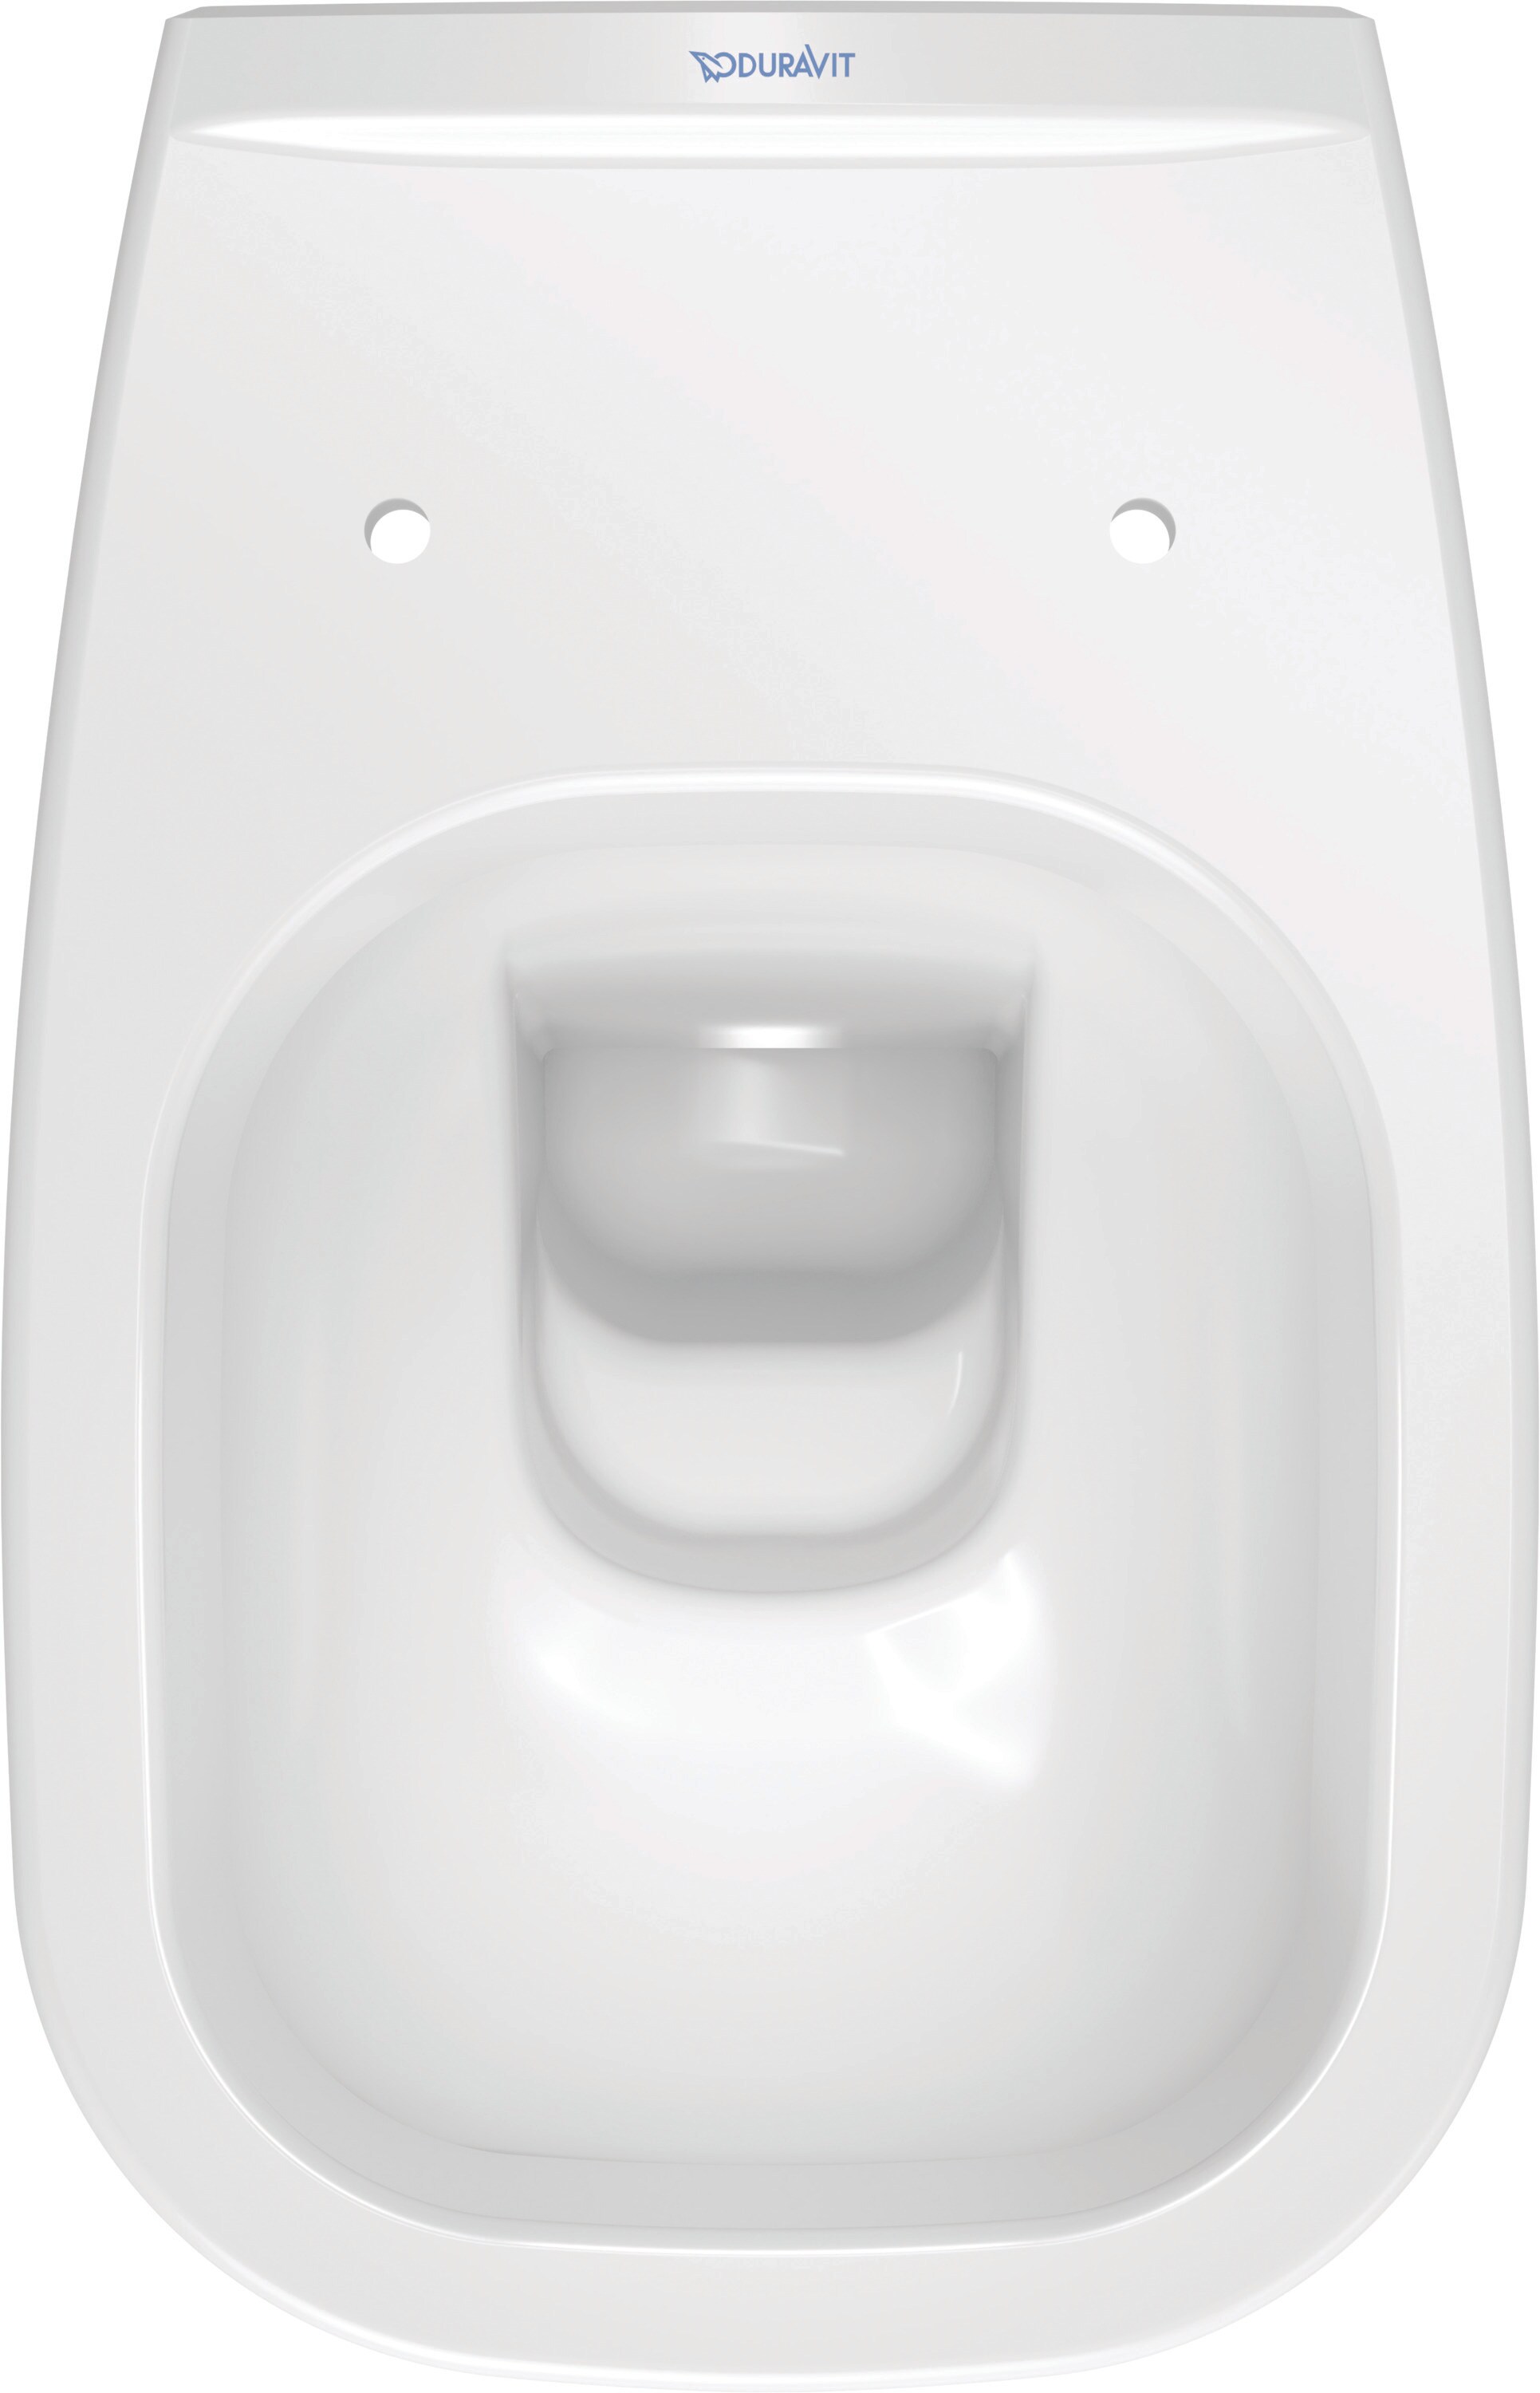 Duravit D-Code Wall-Mounted Toilet 25350900922 White